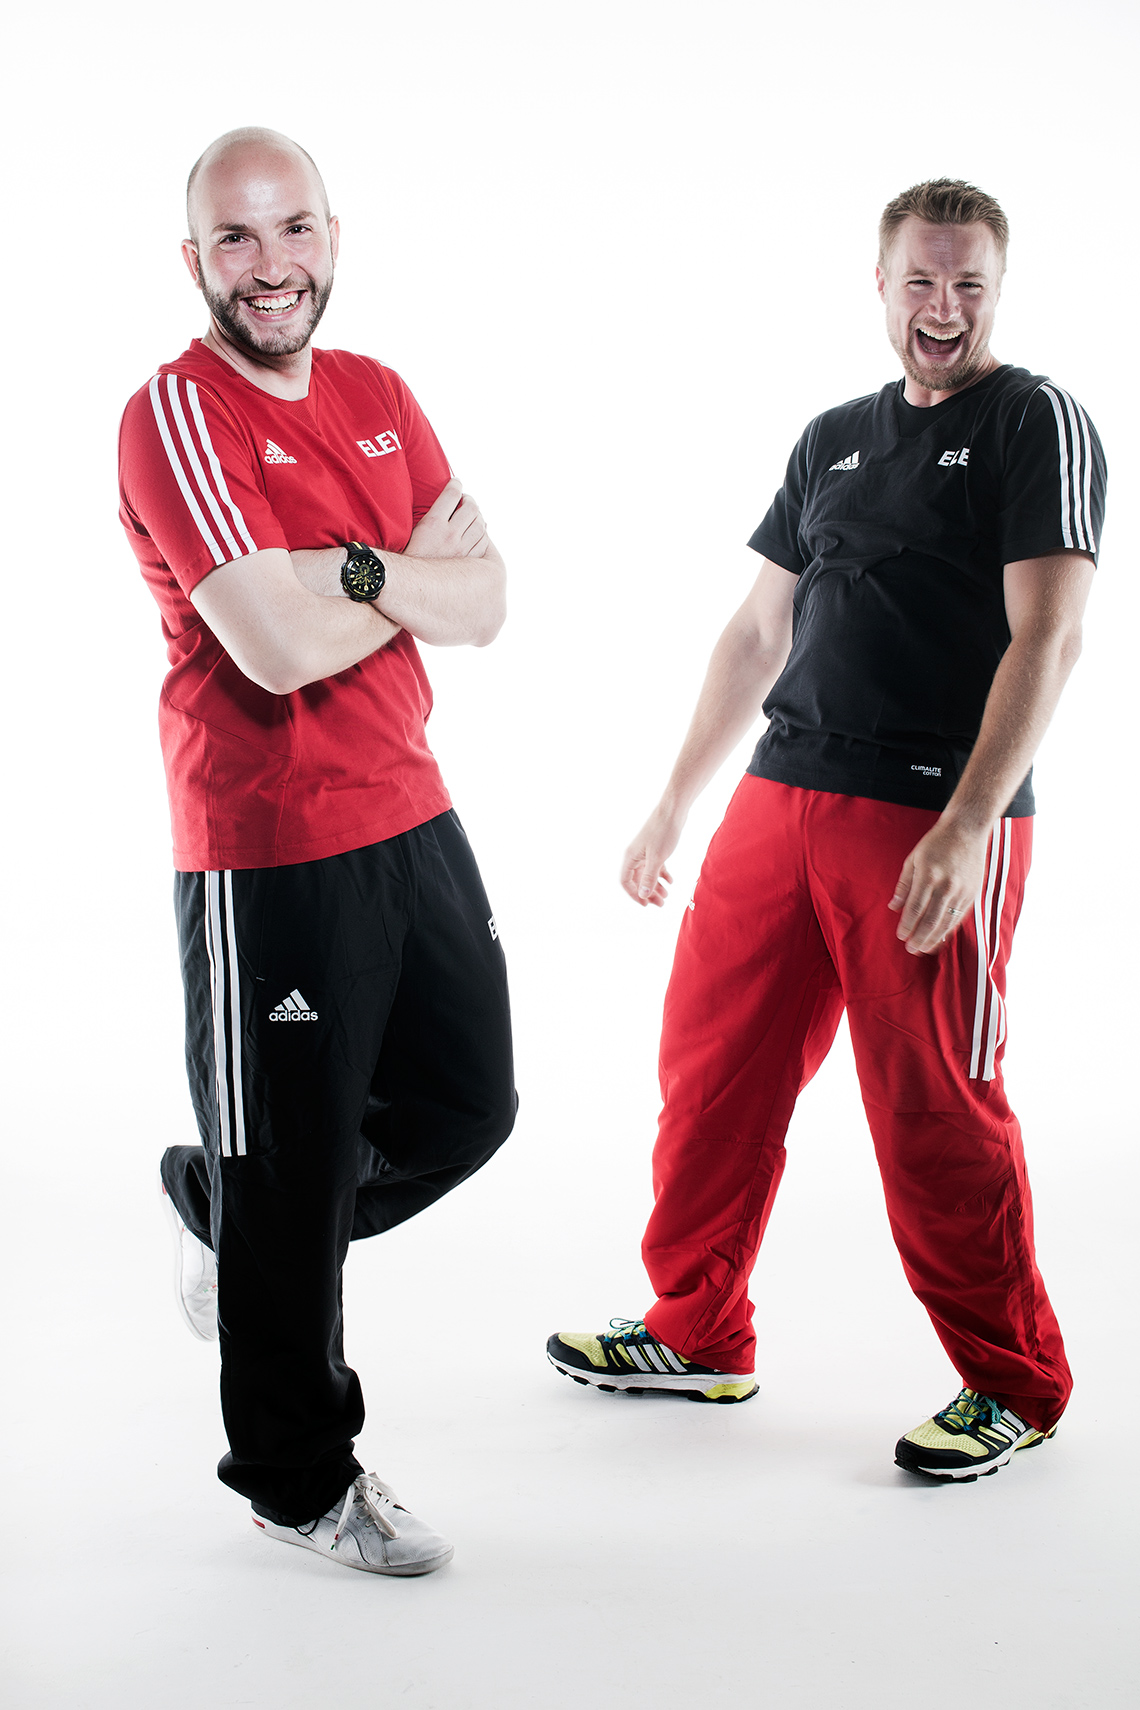 Studio portrait photography of Olympic rivals and friends Italian Nicco Campriani and USA’s Matt Emmons.